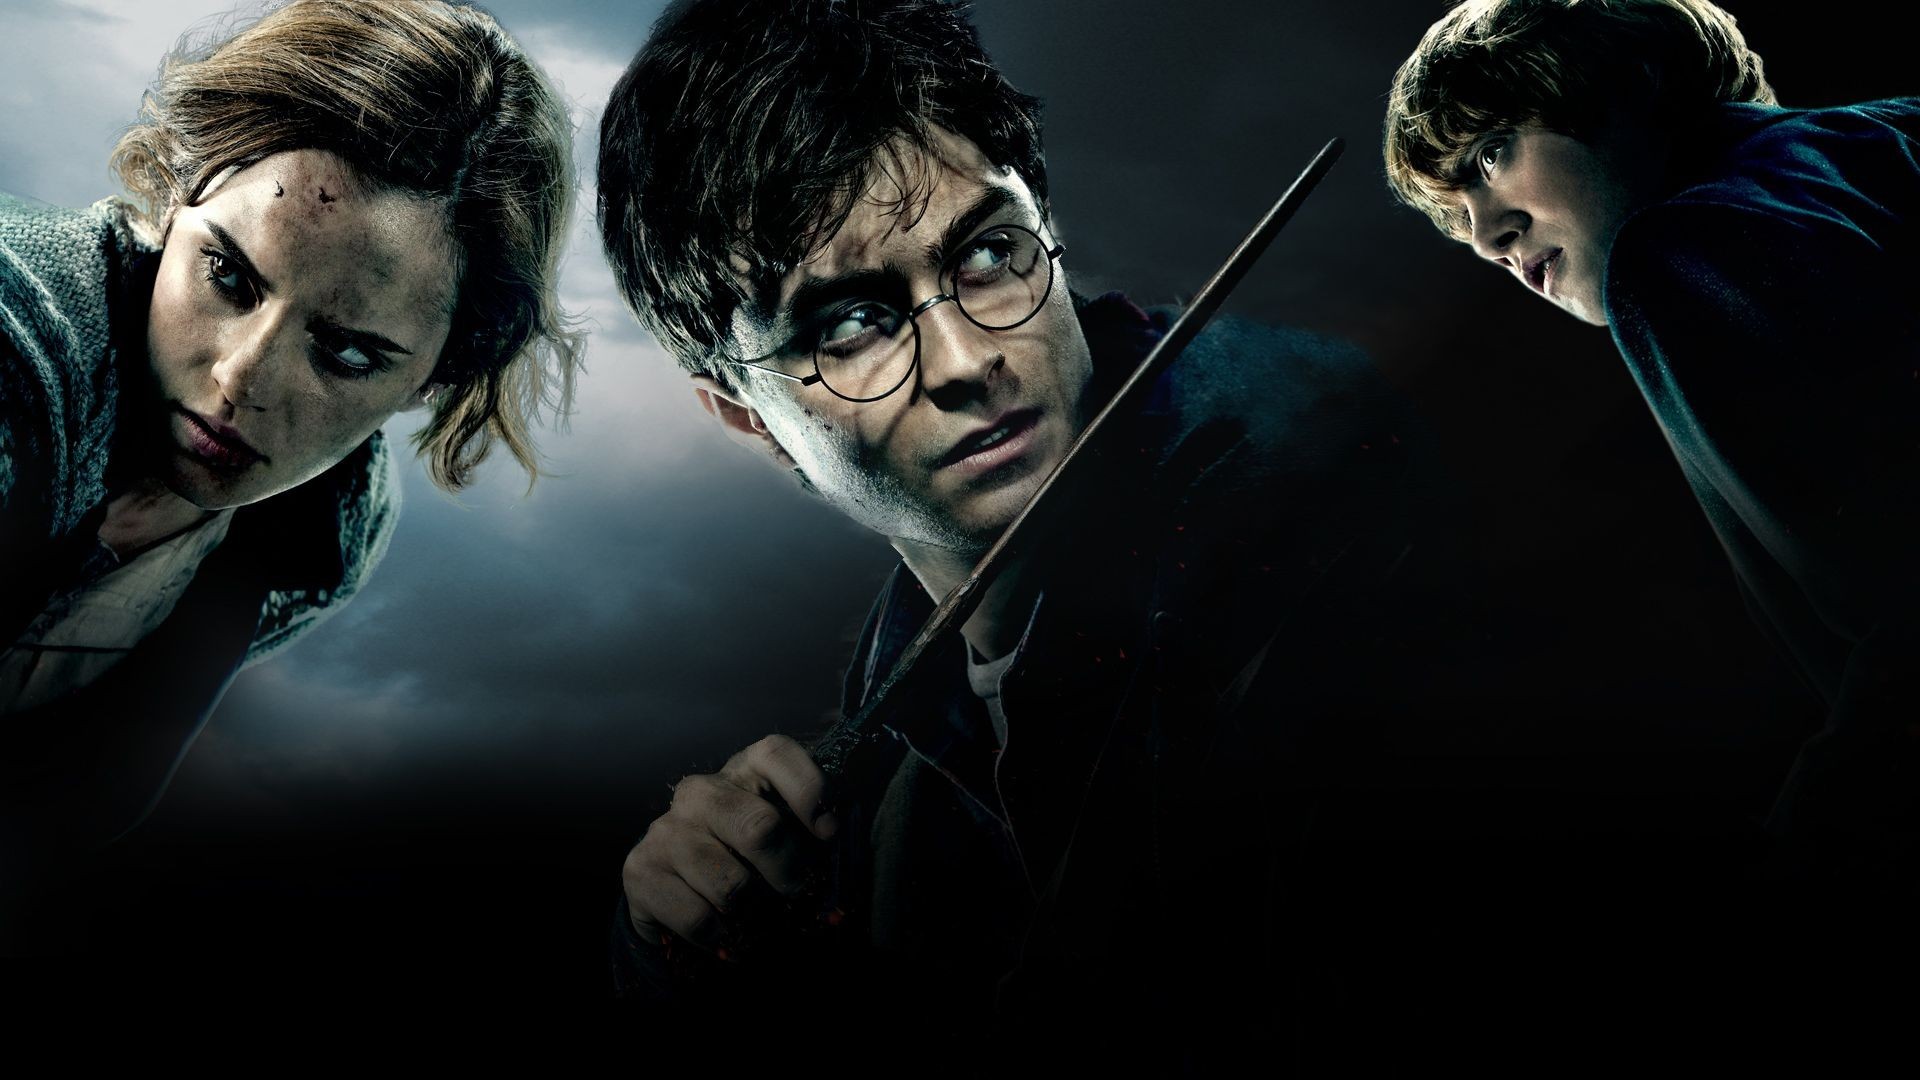 Cool Wallpapers harry potter, movie, harry potter and the deathly hallows: part 1, daniel radcliffe, emma watson, hermione granger, ron weasley, rupert grint